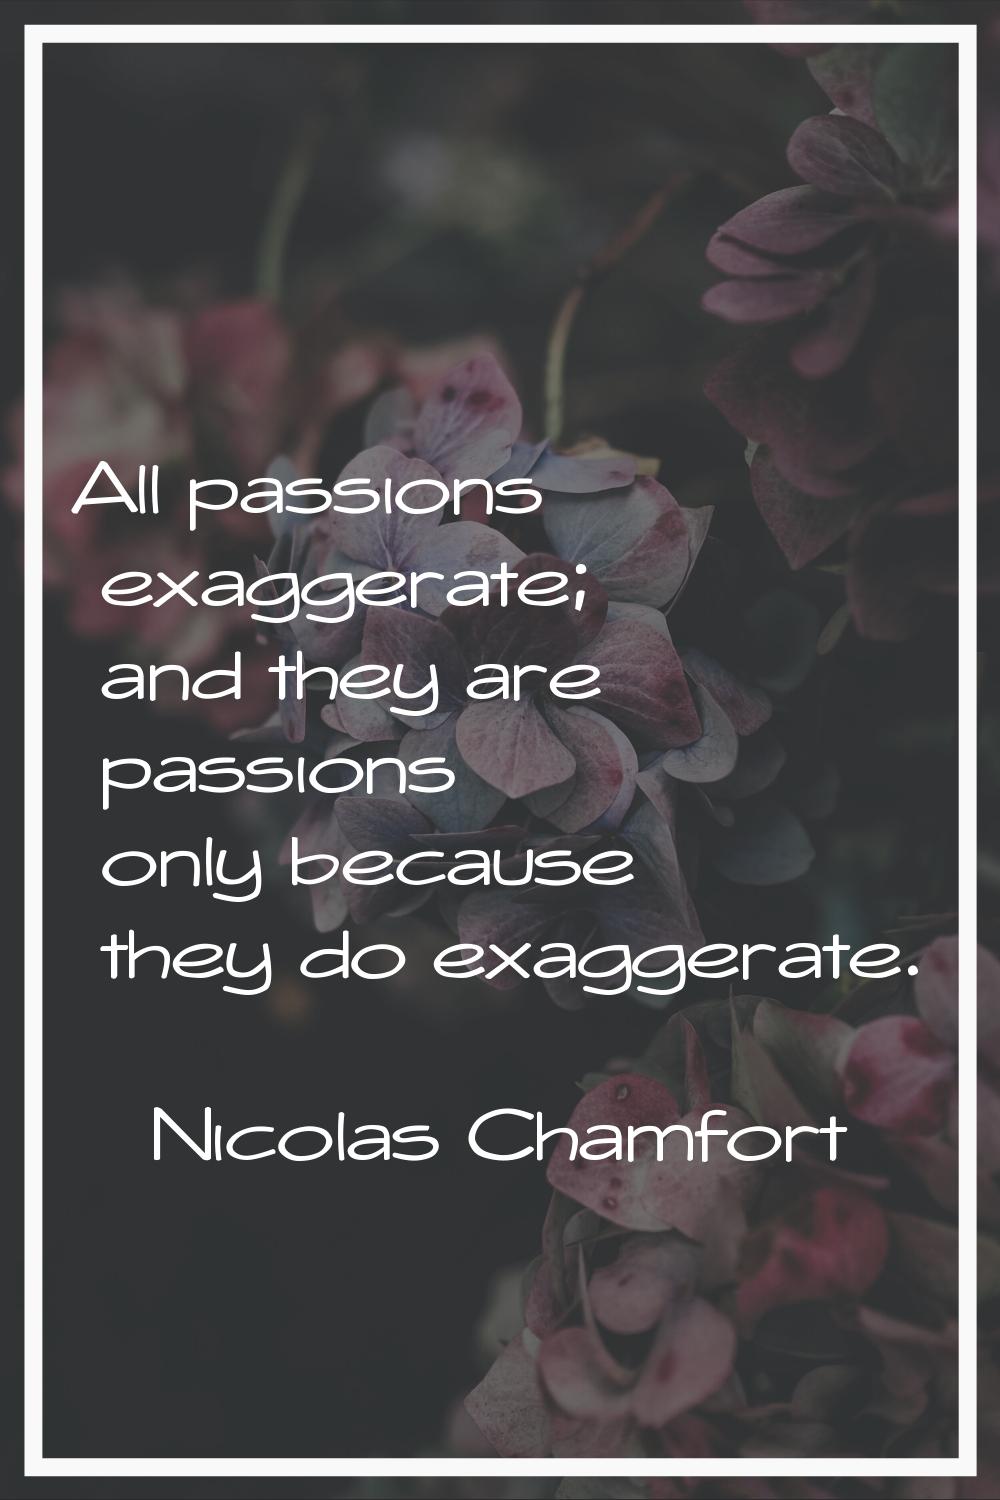 All passions exaggerate; and they are passions only because they do exaggerate.